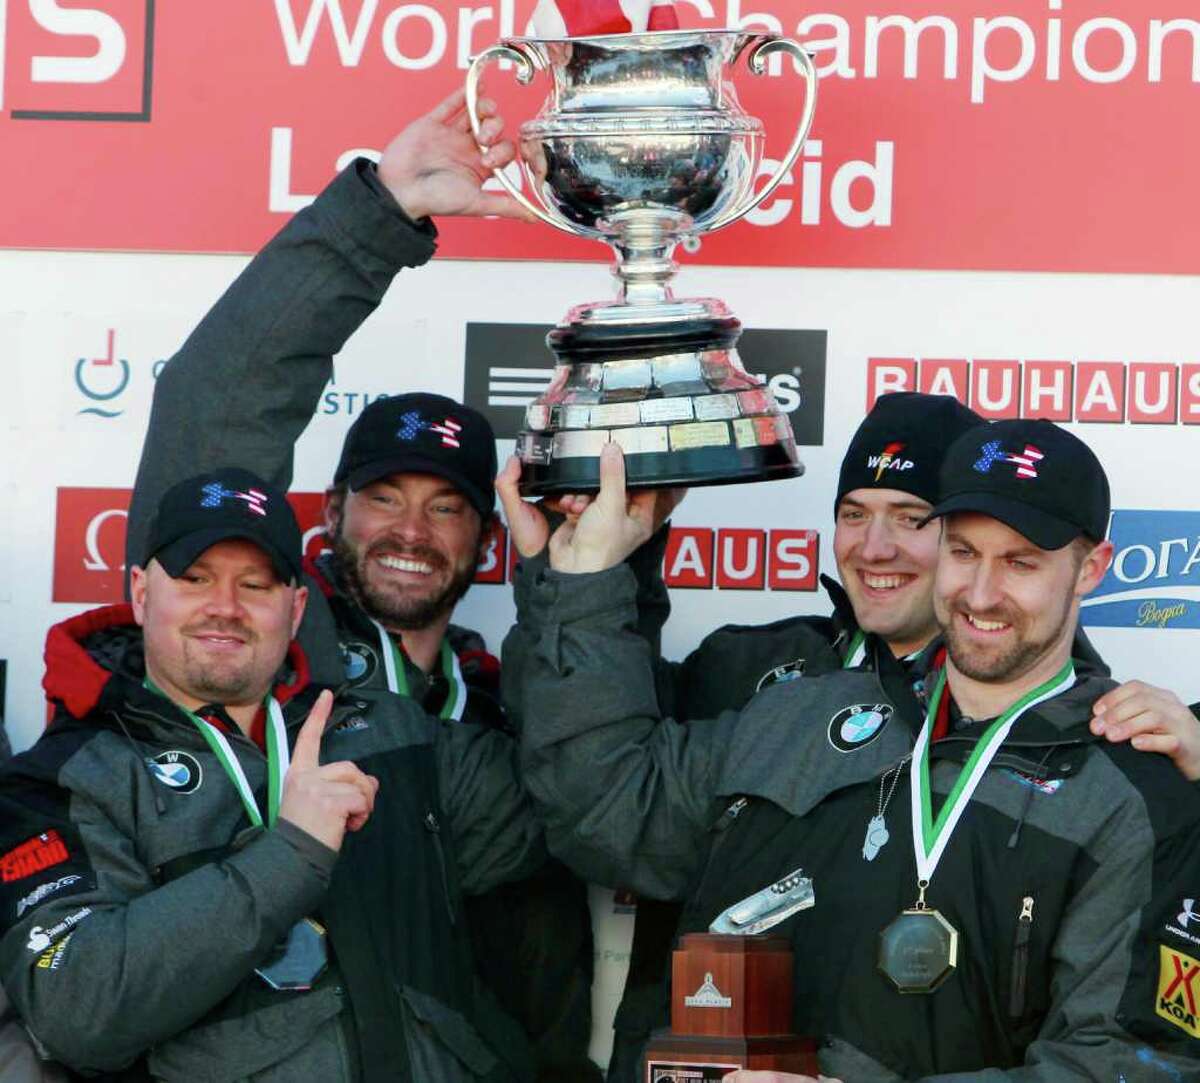 United States' men's four-man bobsled team holds the Martineau Cup after winning the bobsled world championships in Lake Placid, N.Y., on Sunday, Feb. 26, 2012. From left to right, are: Steven Holcomb, Steven Langton, Justin Olsen and Curtis Tomasevicz.